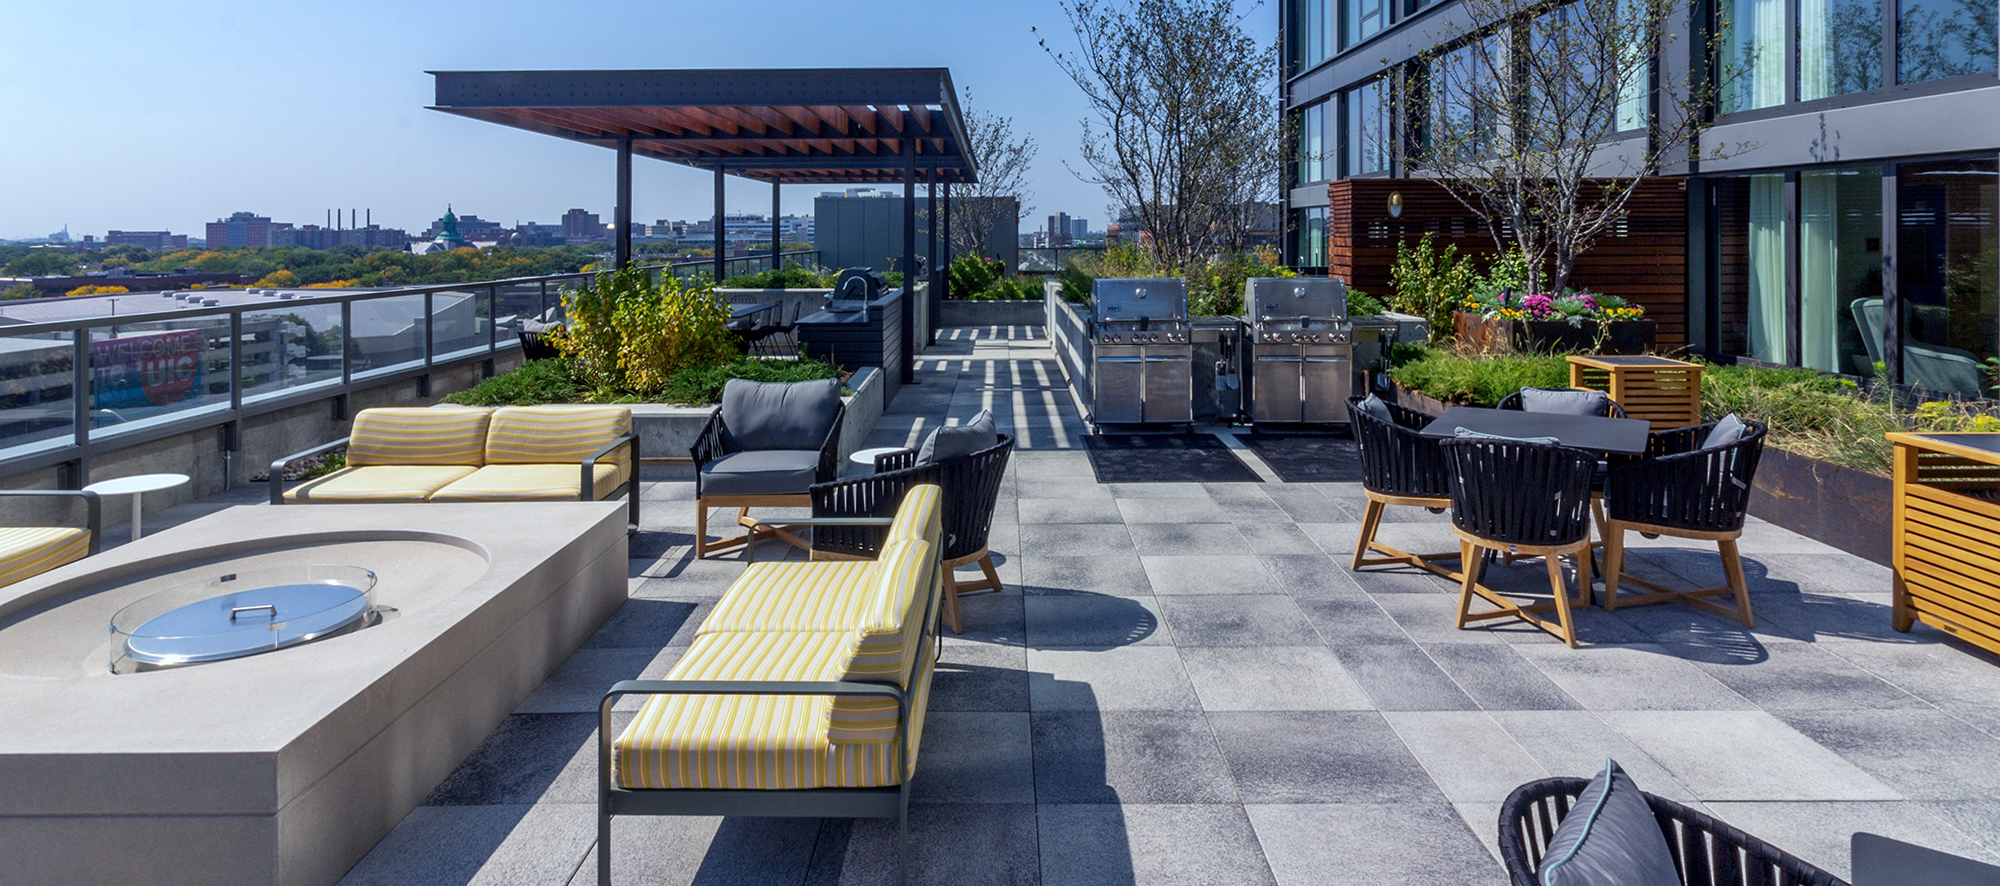 A roof deck overlooking the Chicago skyline features grey speckled Umbriano slabs and outdoor amenities including an outdoor kitchen.